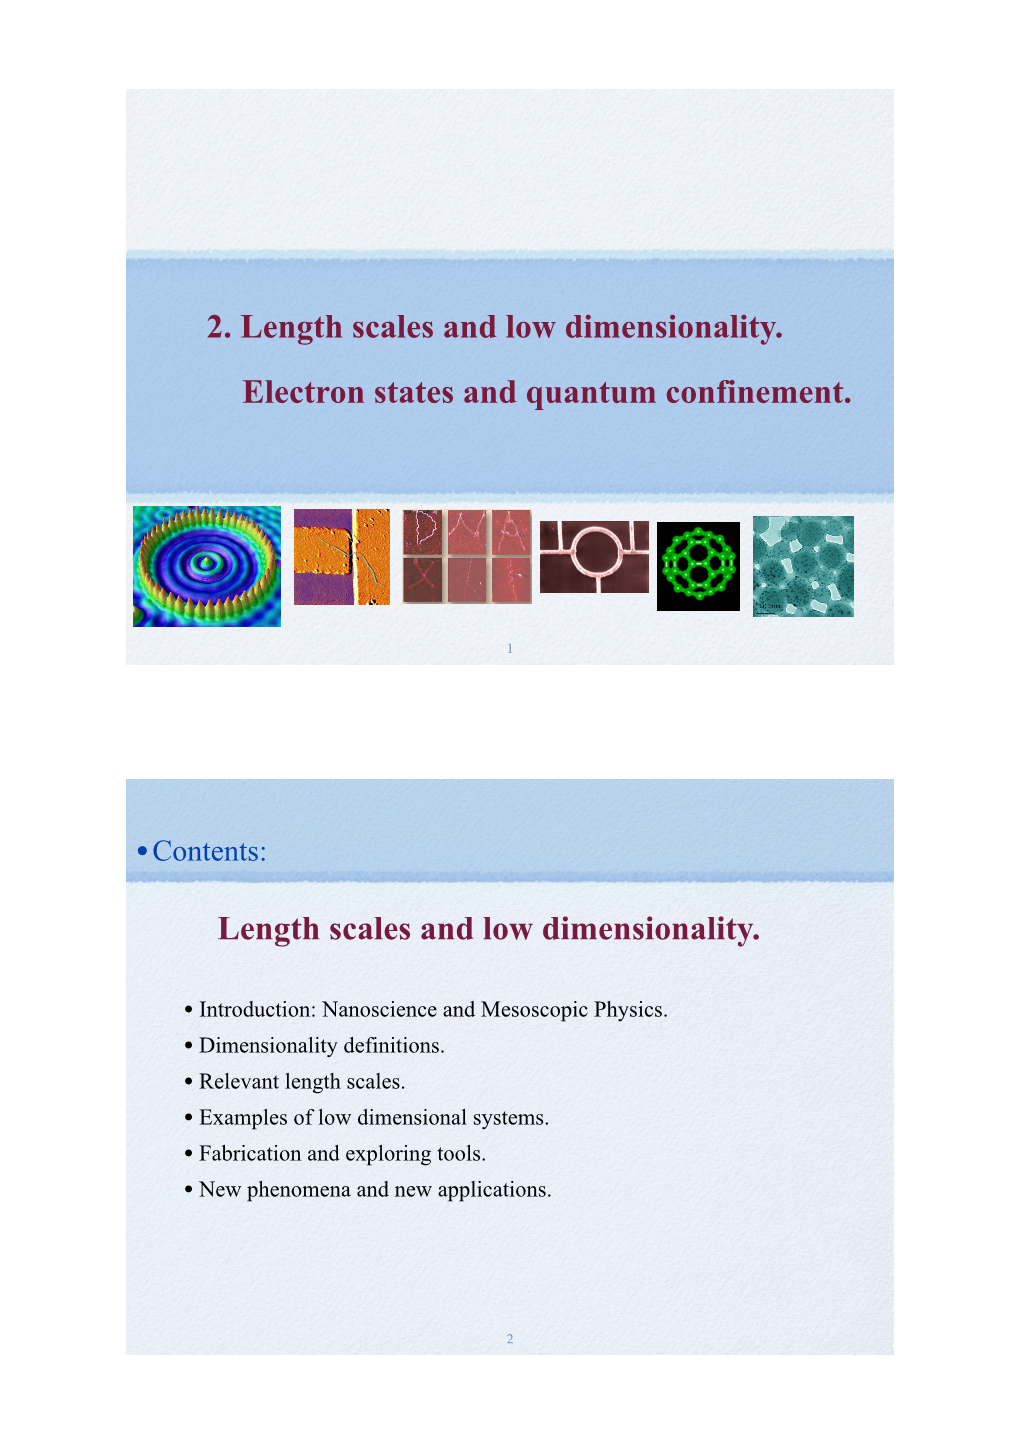 2. Length Scales and Low Dimensionality. Electron States and Quantum Confinement. Length Scales and Low Dimensionality